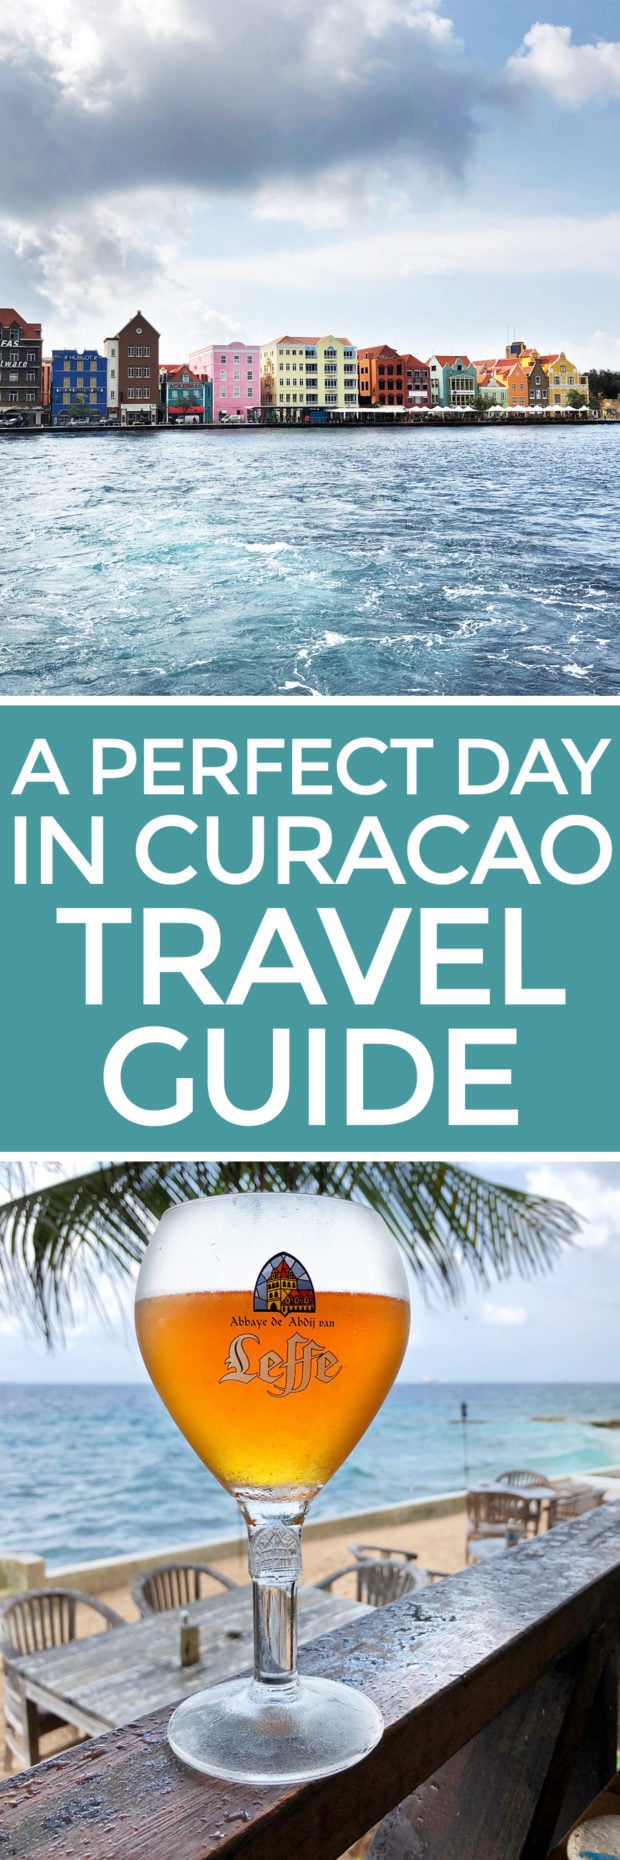 A Perfect Day in Curaçao Travel Guide | cakenknife.com #sponsored #carnival #travel #cruise #cruising